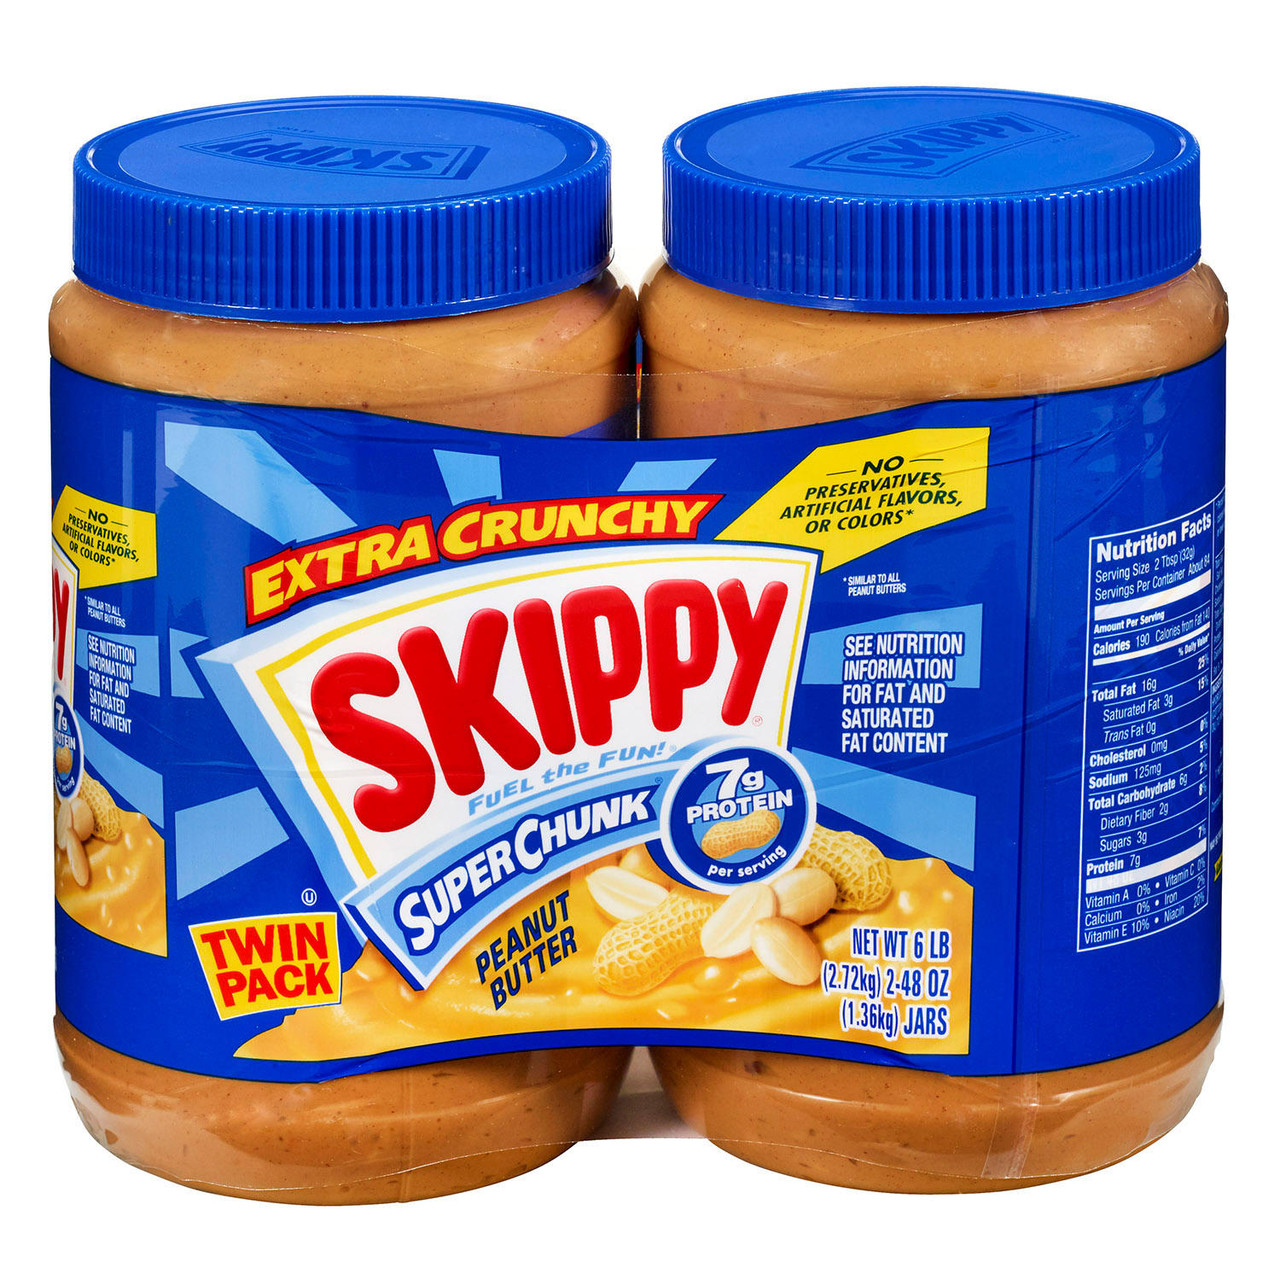 Skippy Super Chunk Peanut Butter (48 oz., 2 pk.) - [From 46.00 - Choose pk Qty ] - *Ships from Miami